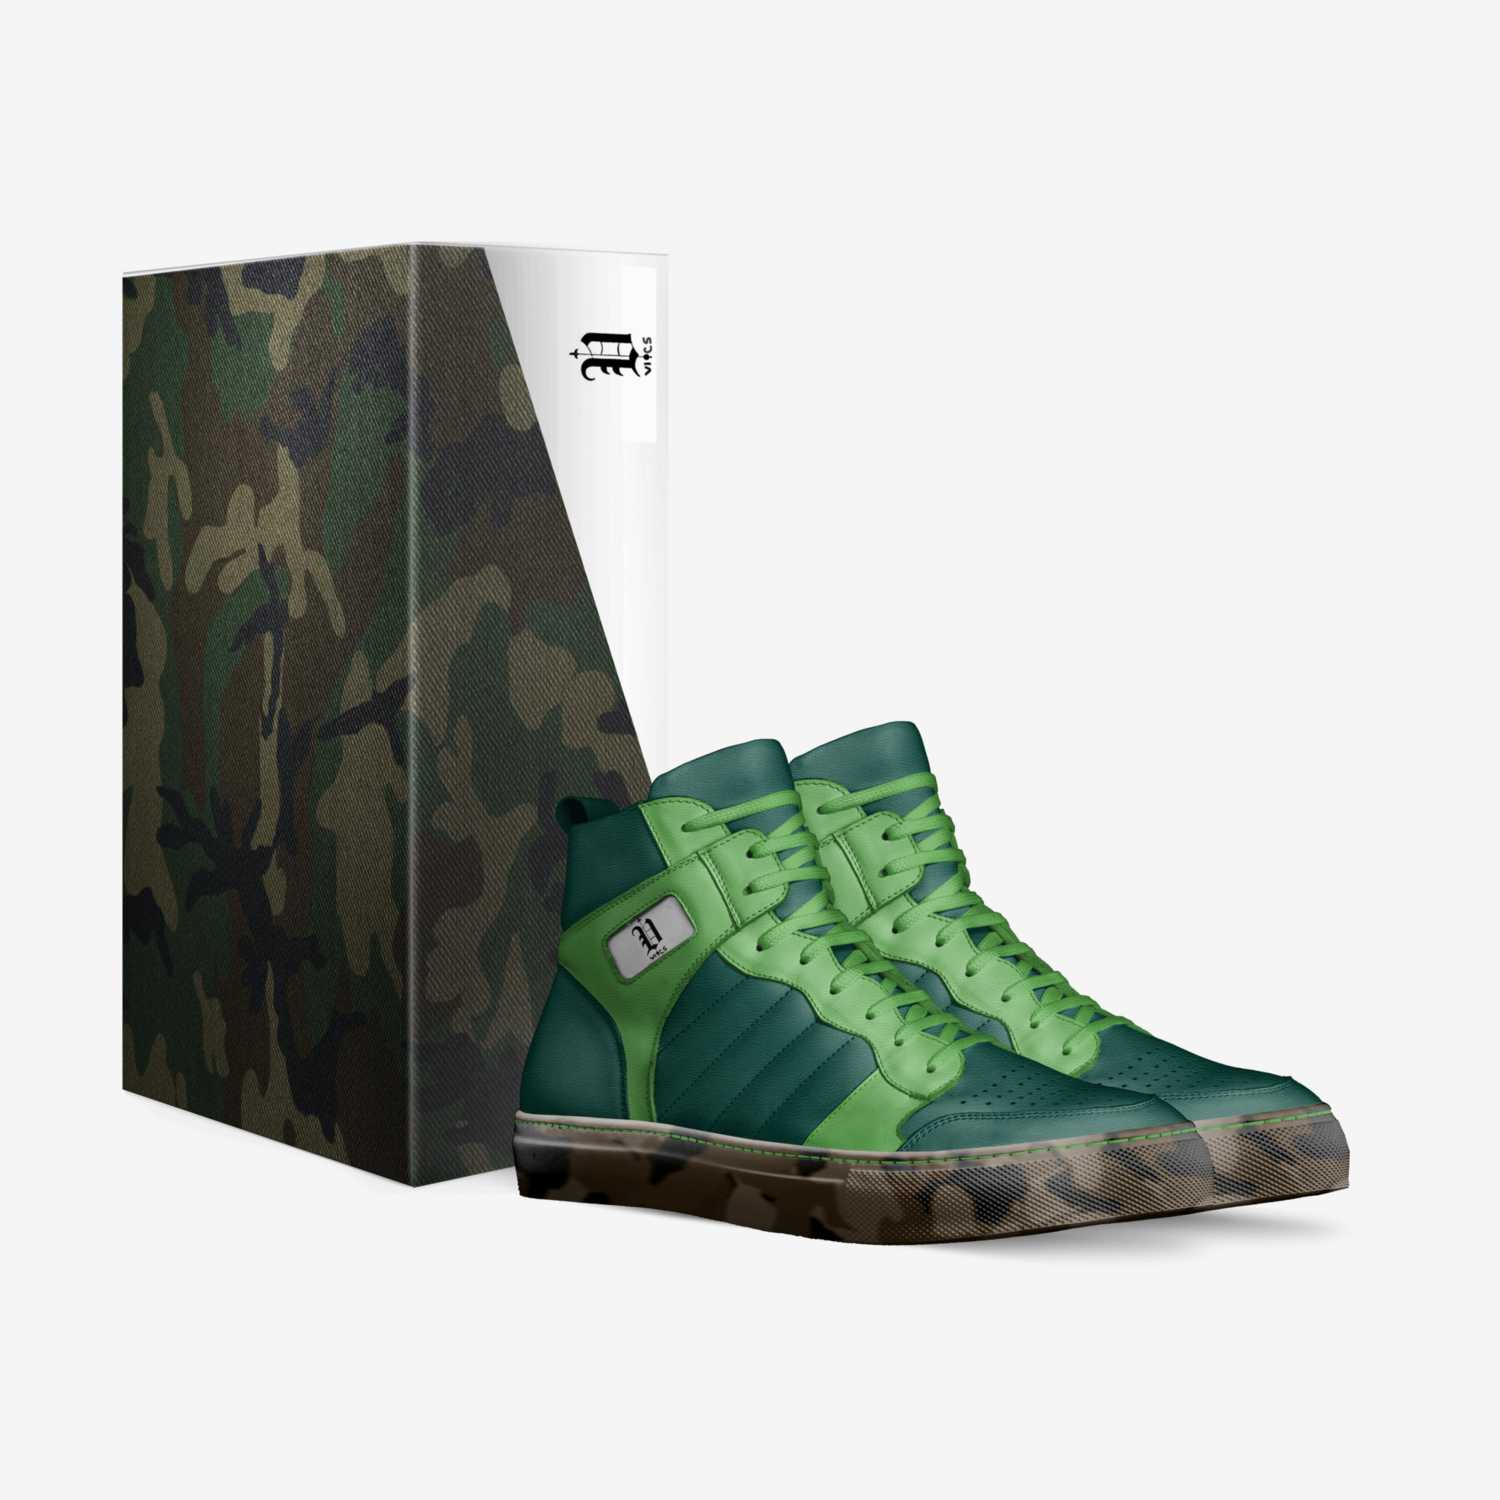 vics camo custom made in Italy shoes by Brayden Murphy | Box view